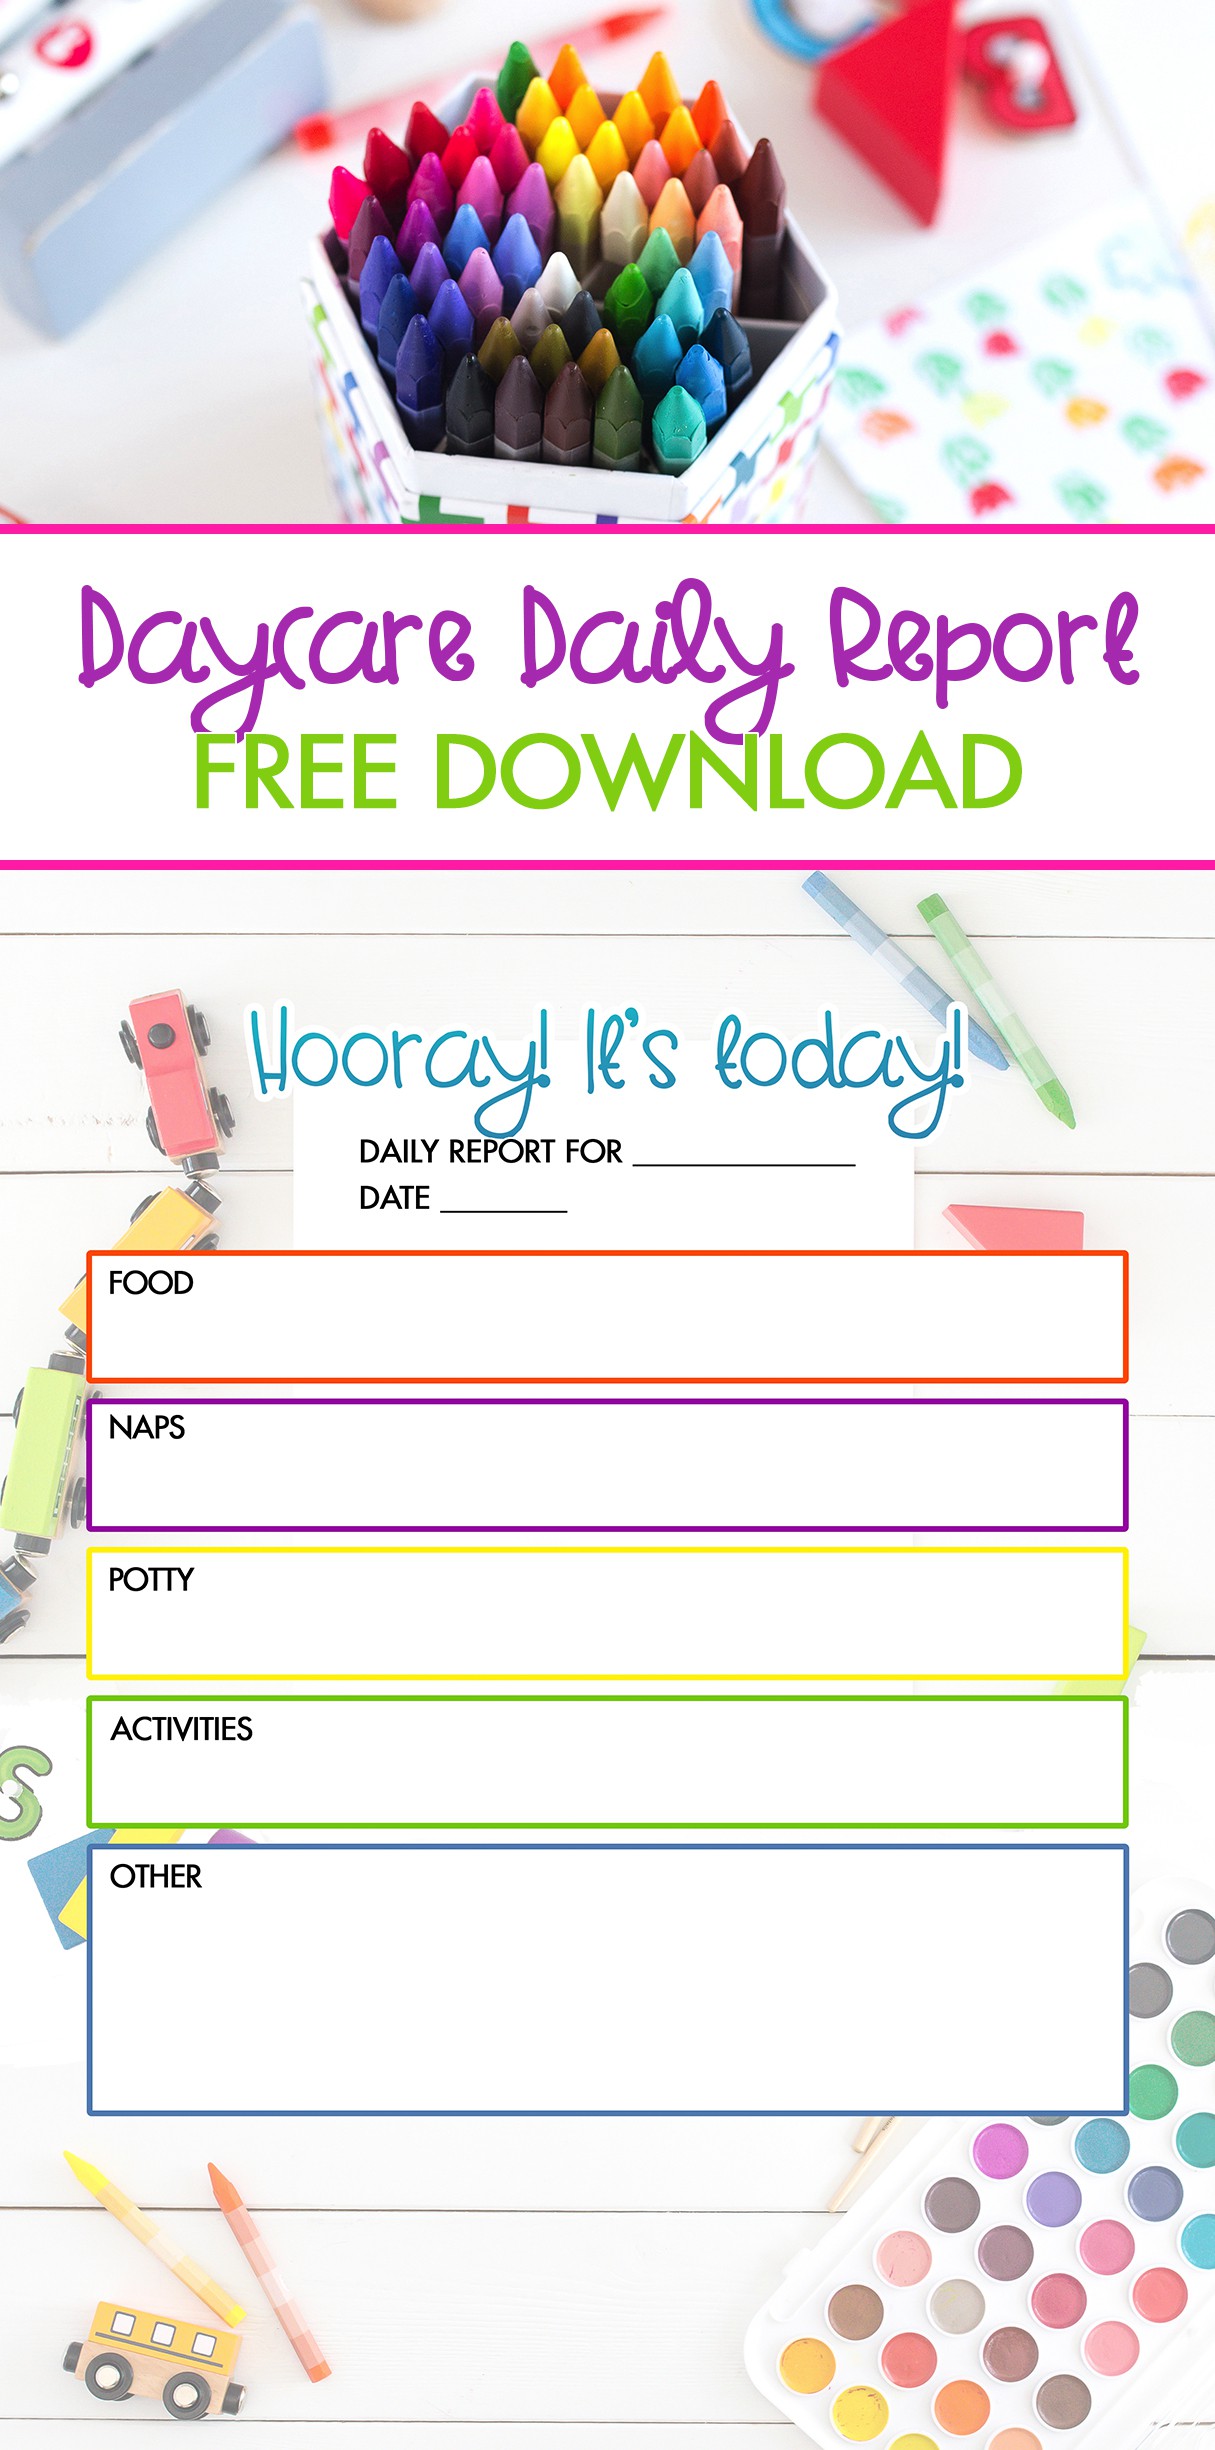 Free Daycare Daily Report Printable pinterest The DIY Lighthouse